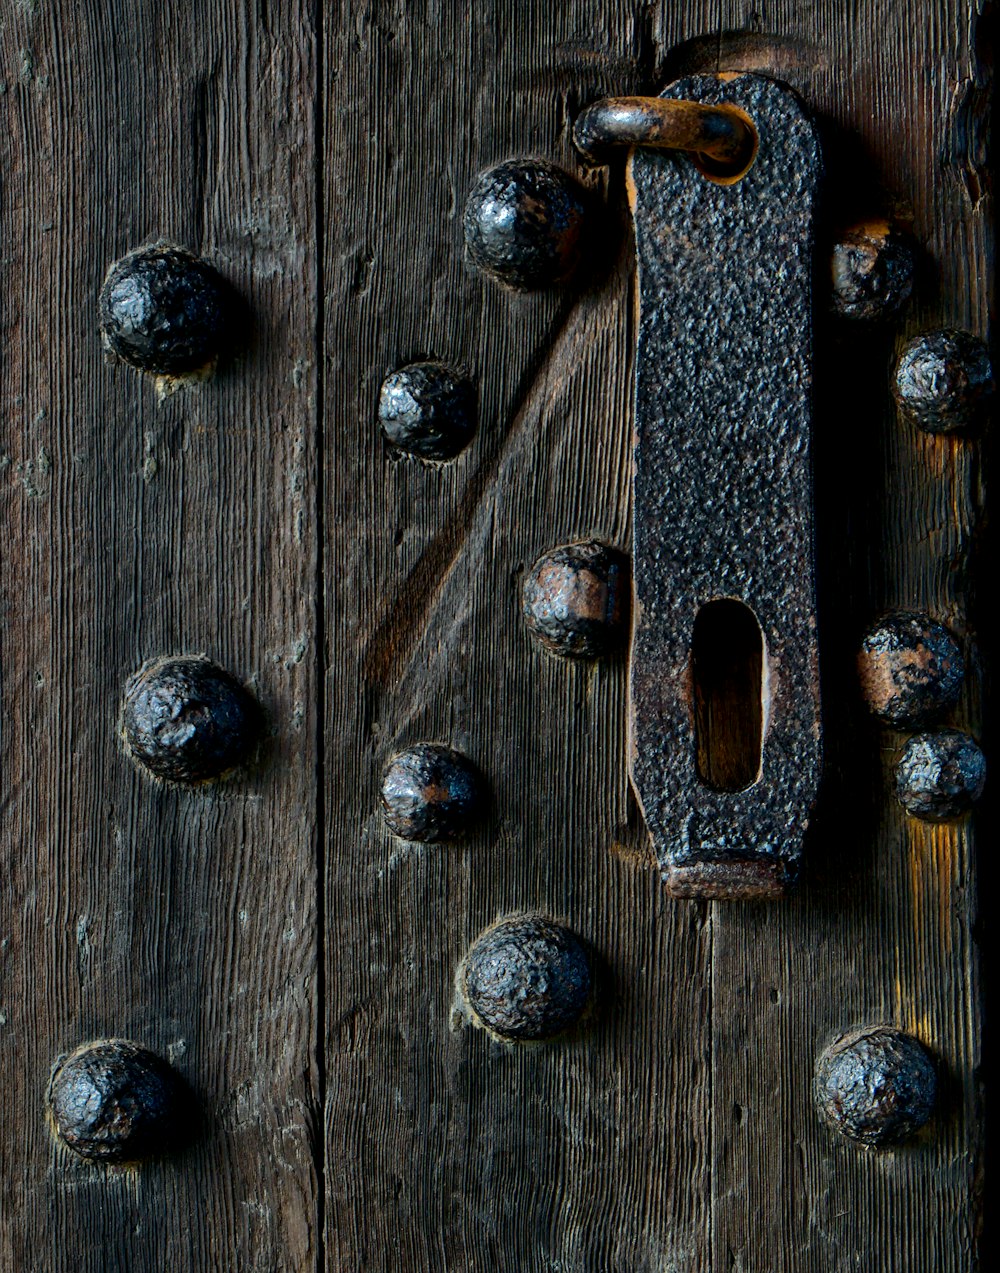 a door handle on a wooden door surrounded by nuts